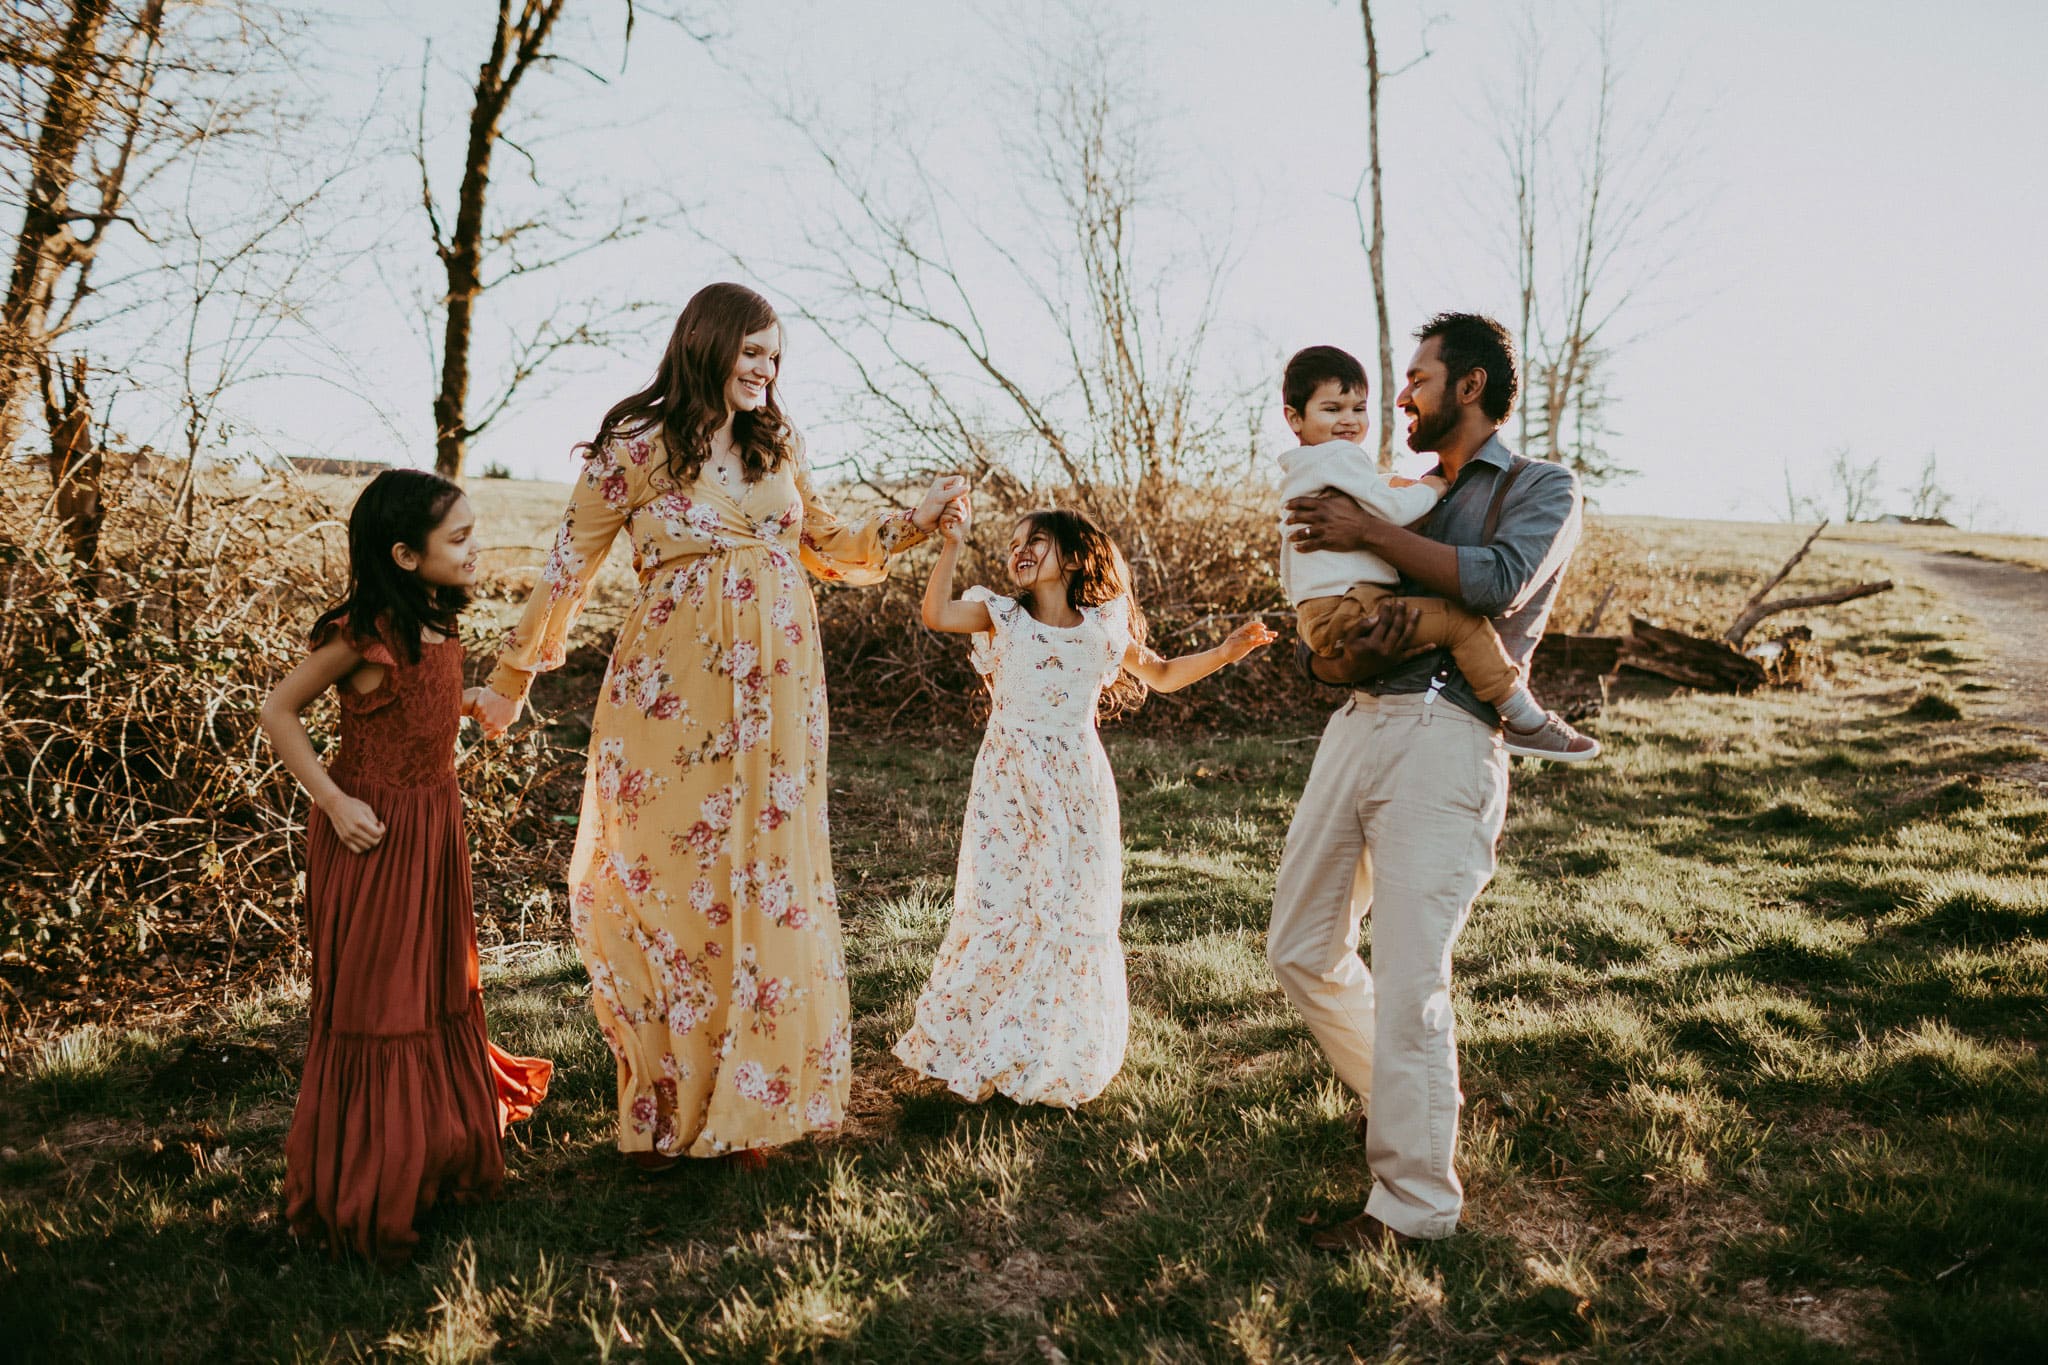 Family dancing together - ideas for what to wear to family photos